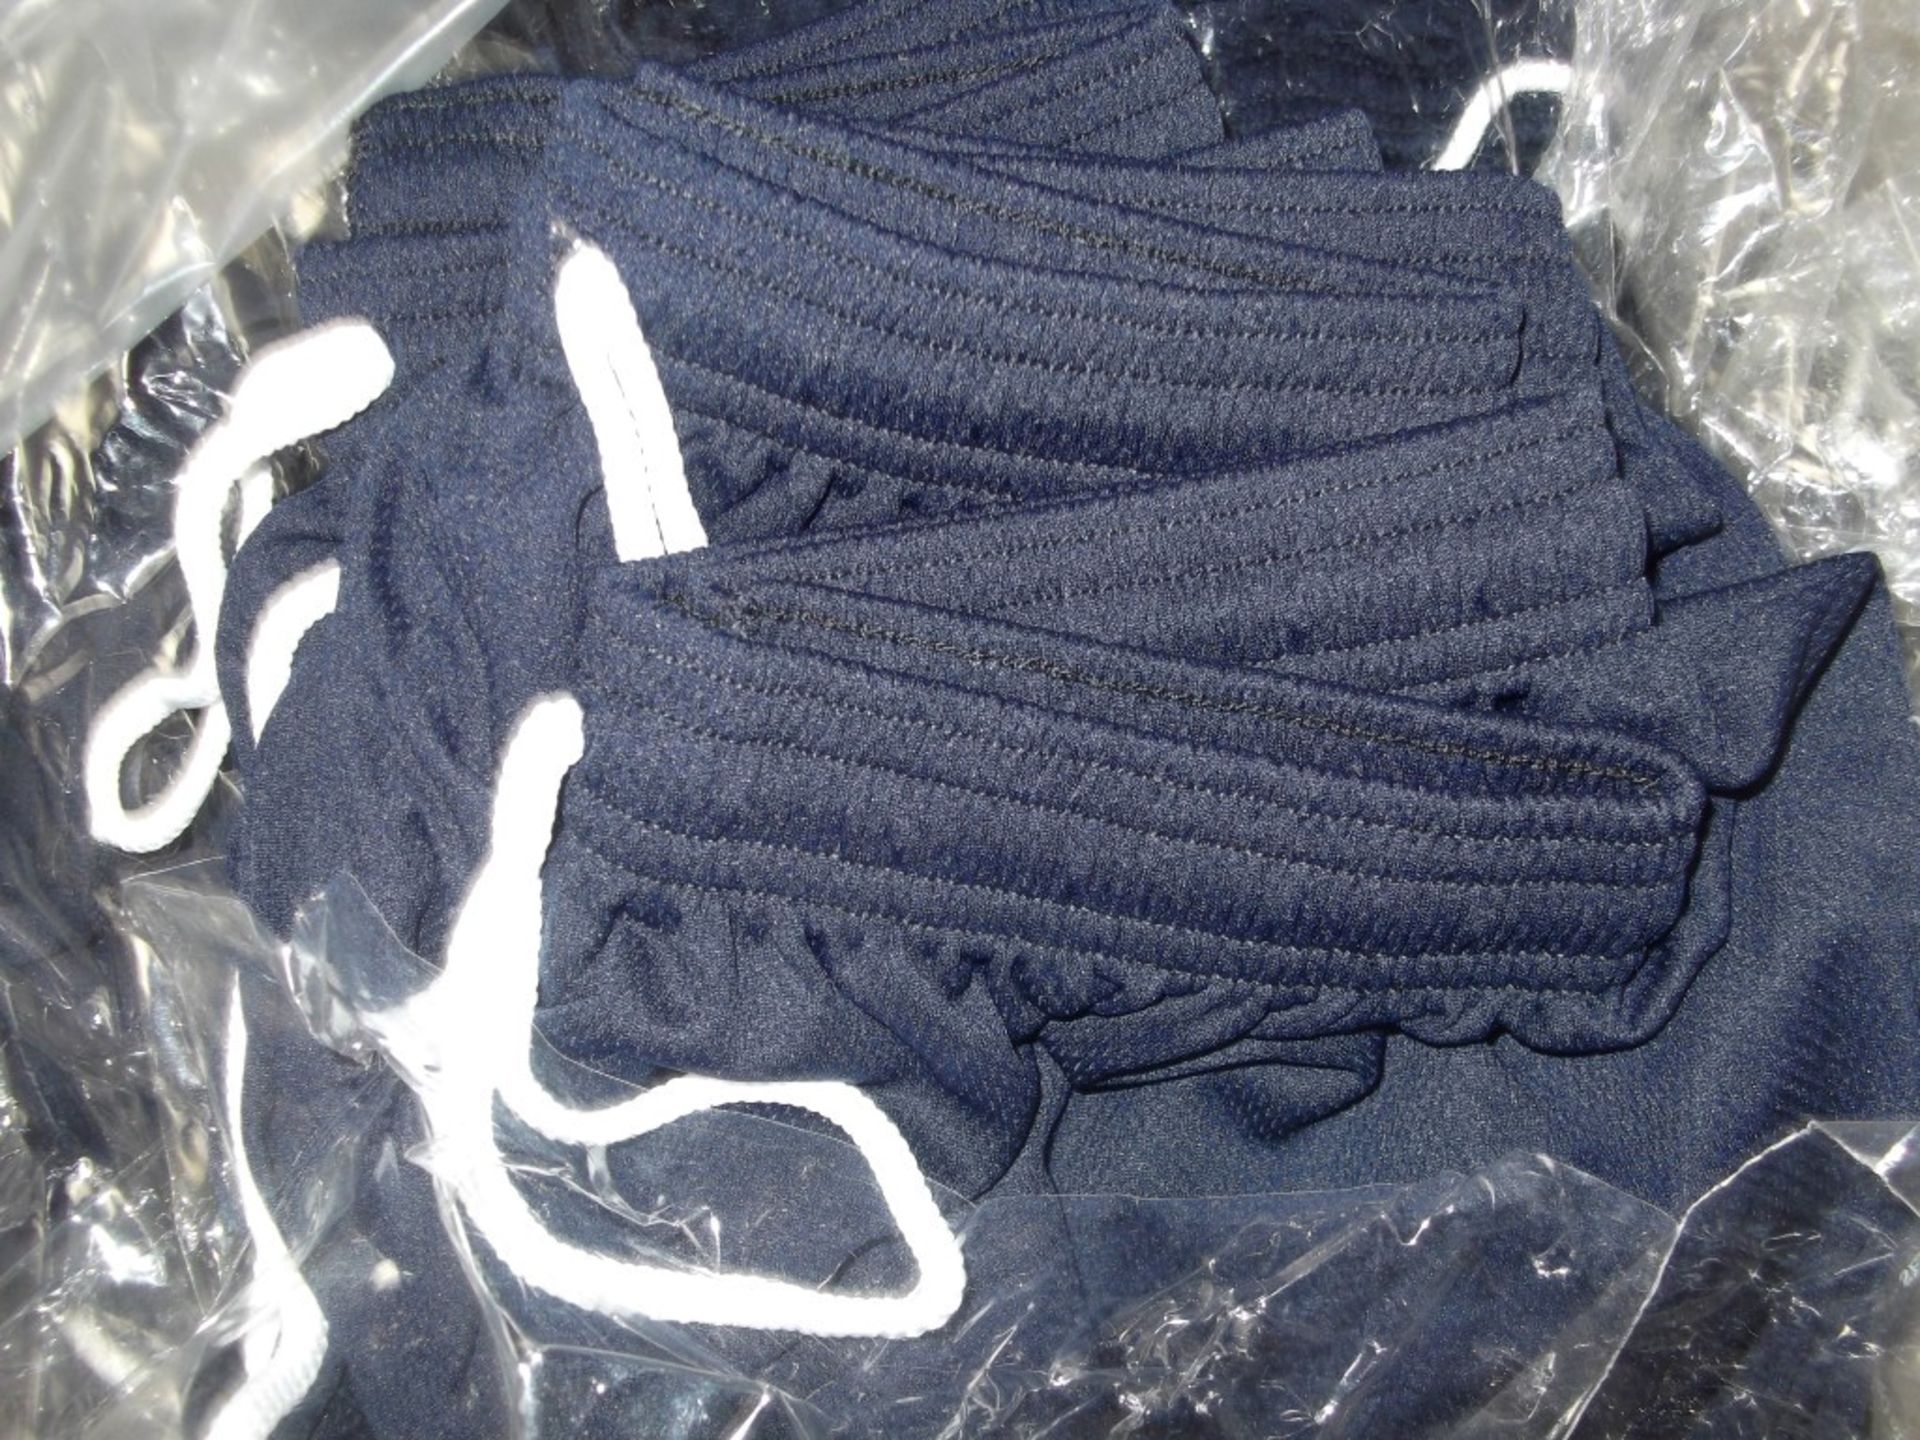 40 x Pairs Of Navy Blue Shorts - British Made - Sizes: 30 - 38 UK - New & Bagged -  CL155 - Ref: - Image 3 of 3